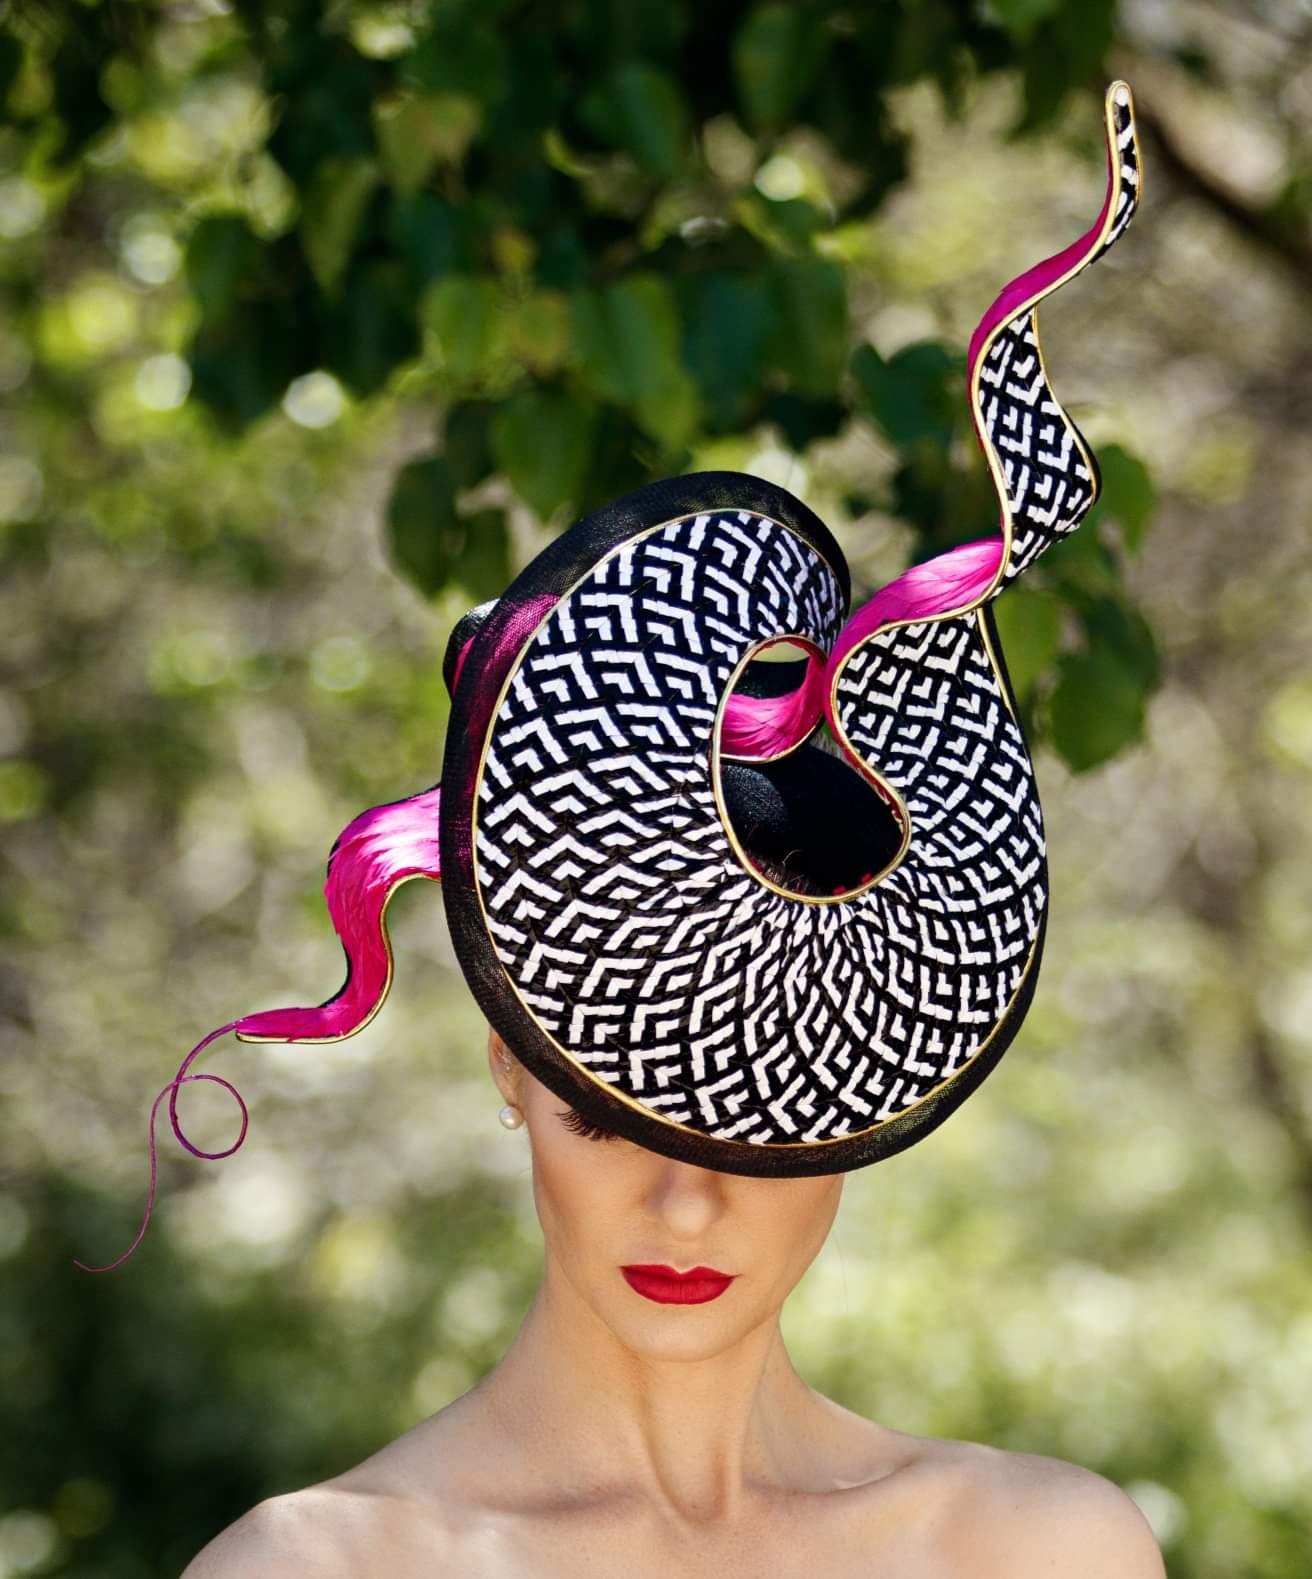 Hat by Rebecca Carswell of Amelda Millinery